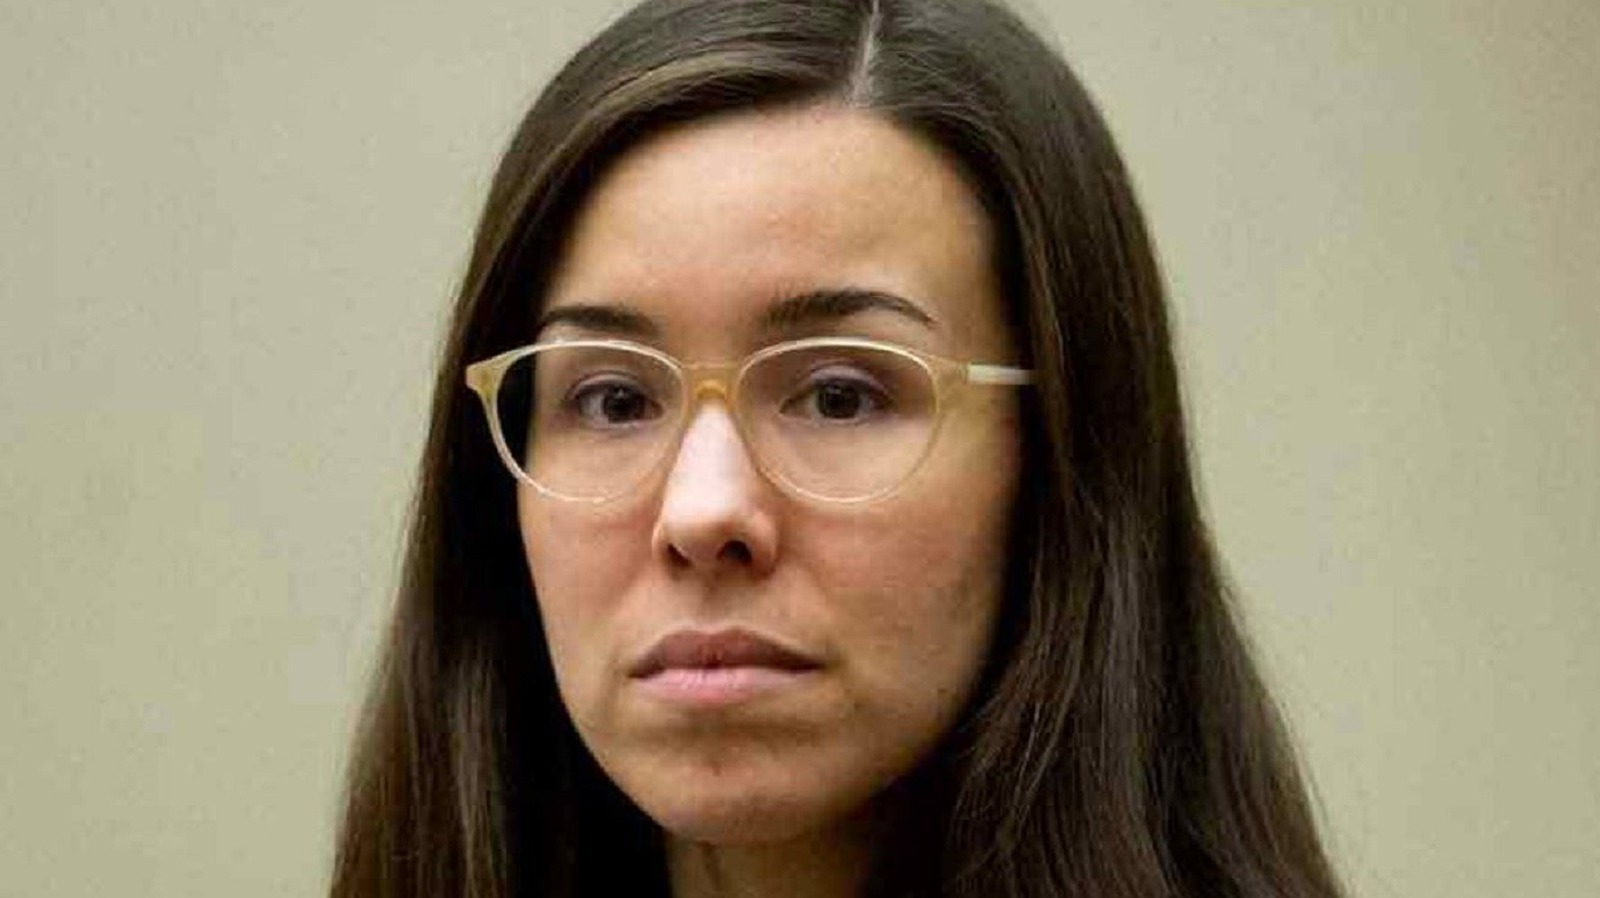 Where Is the Notorious Killer Jodi Arias Live Today?